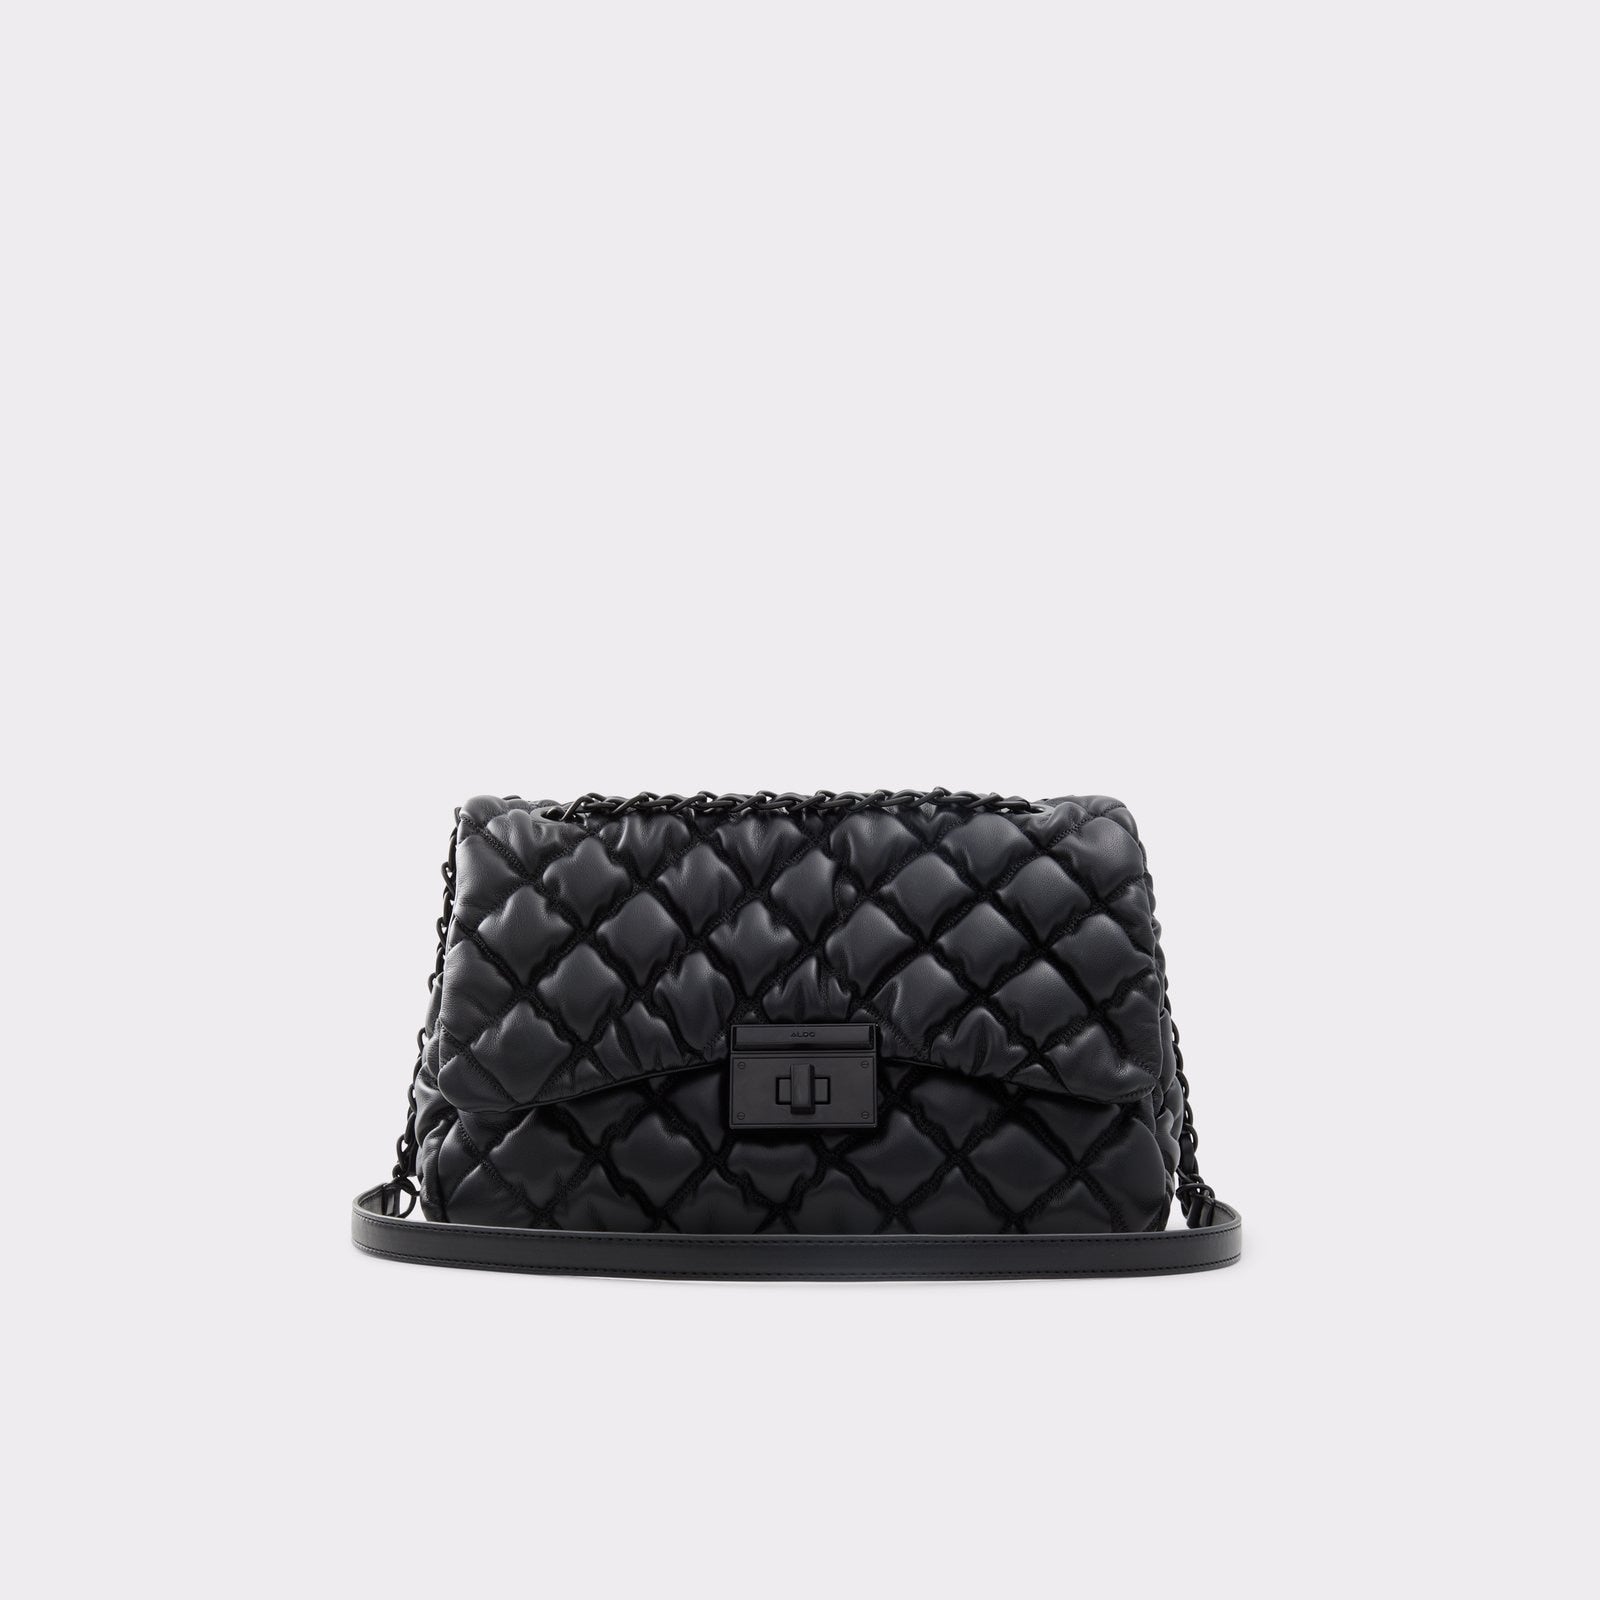 Women's Handbags In The Outlet Collection | Items Up To 70% Off at ALDO  Shoes